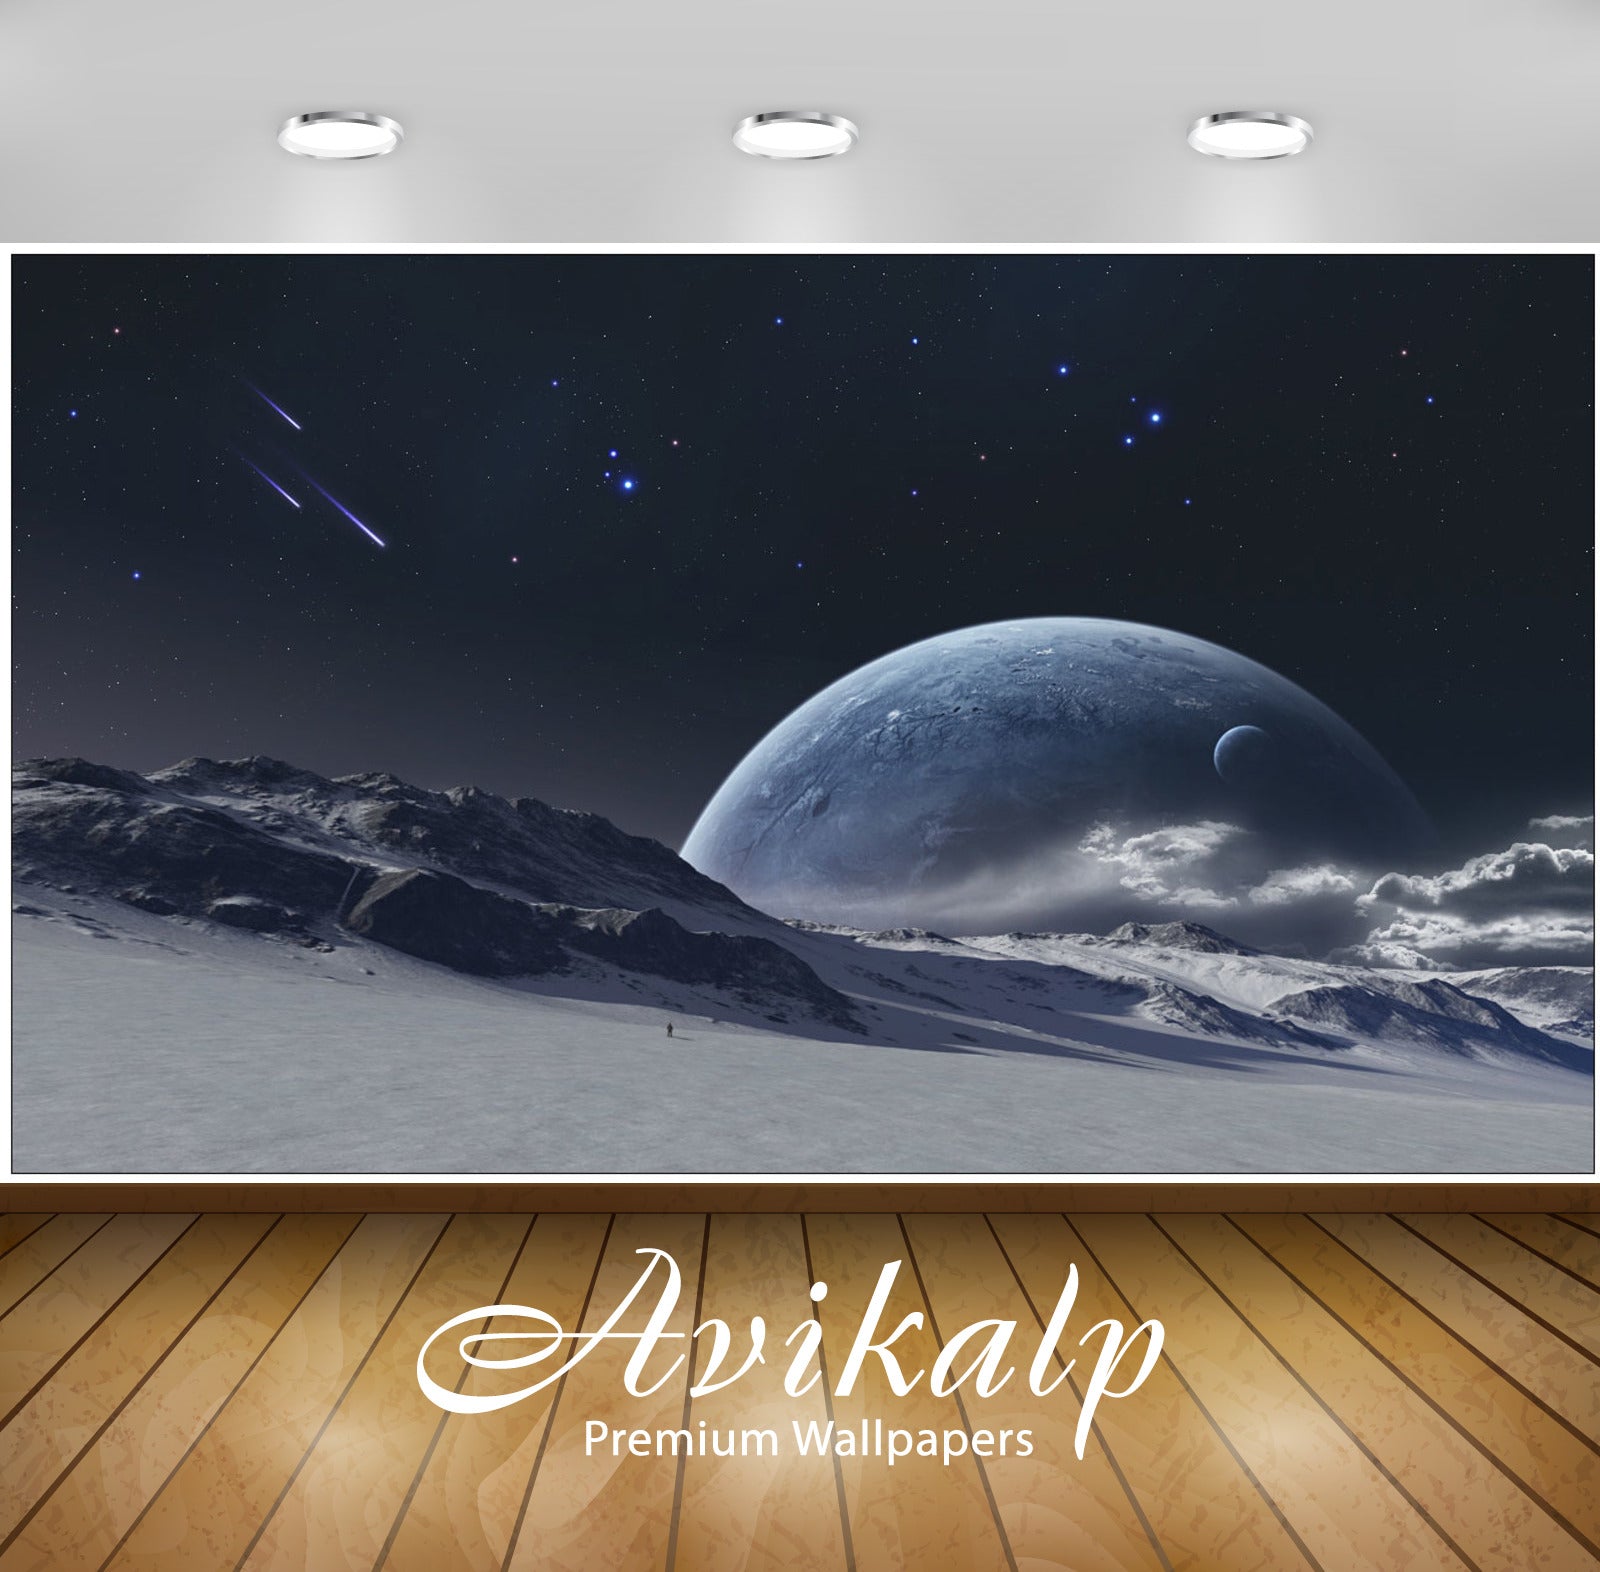 Avikalp Exclusive Awi1609 Shooting Stars Full HD Wallpapers for Living room, Hall, Kids Room, Kitche